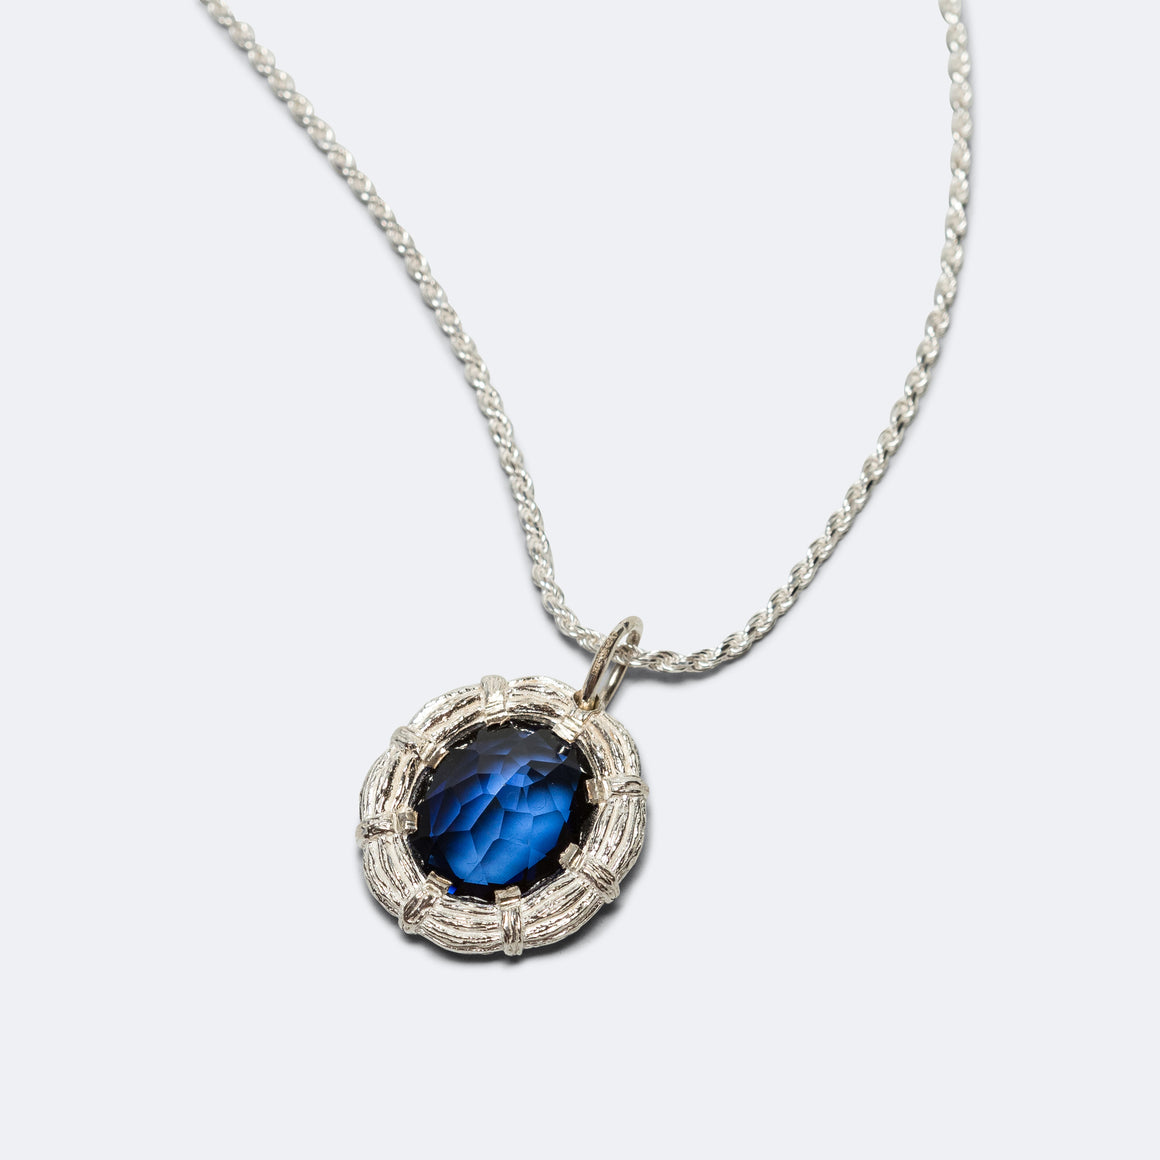 Bleue Burnham - Bound Willow Pendant - 925 Silver/Blue Sapphire - UP THERE